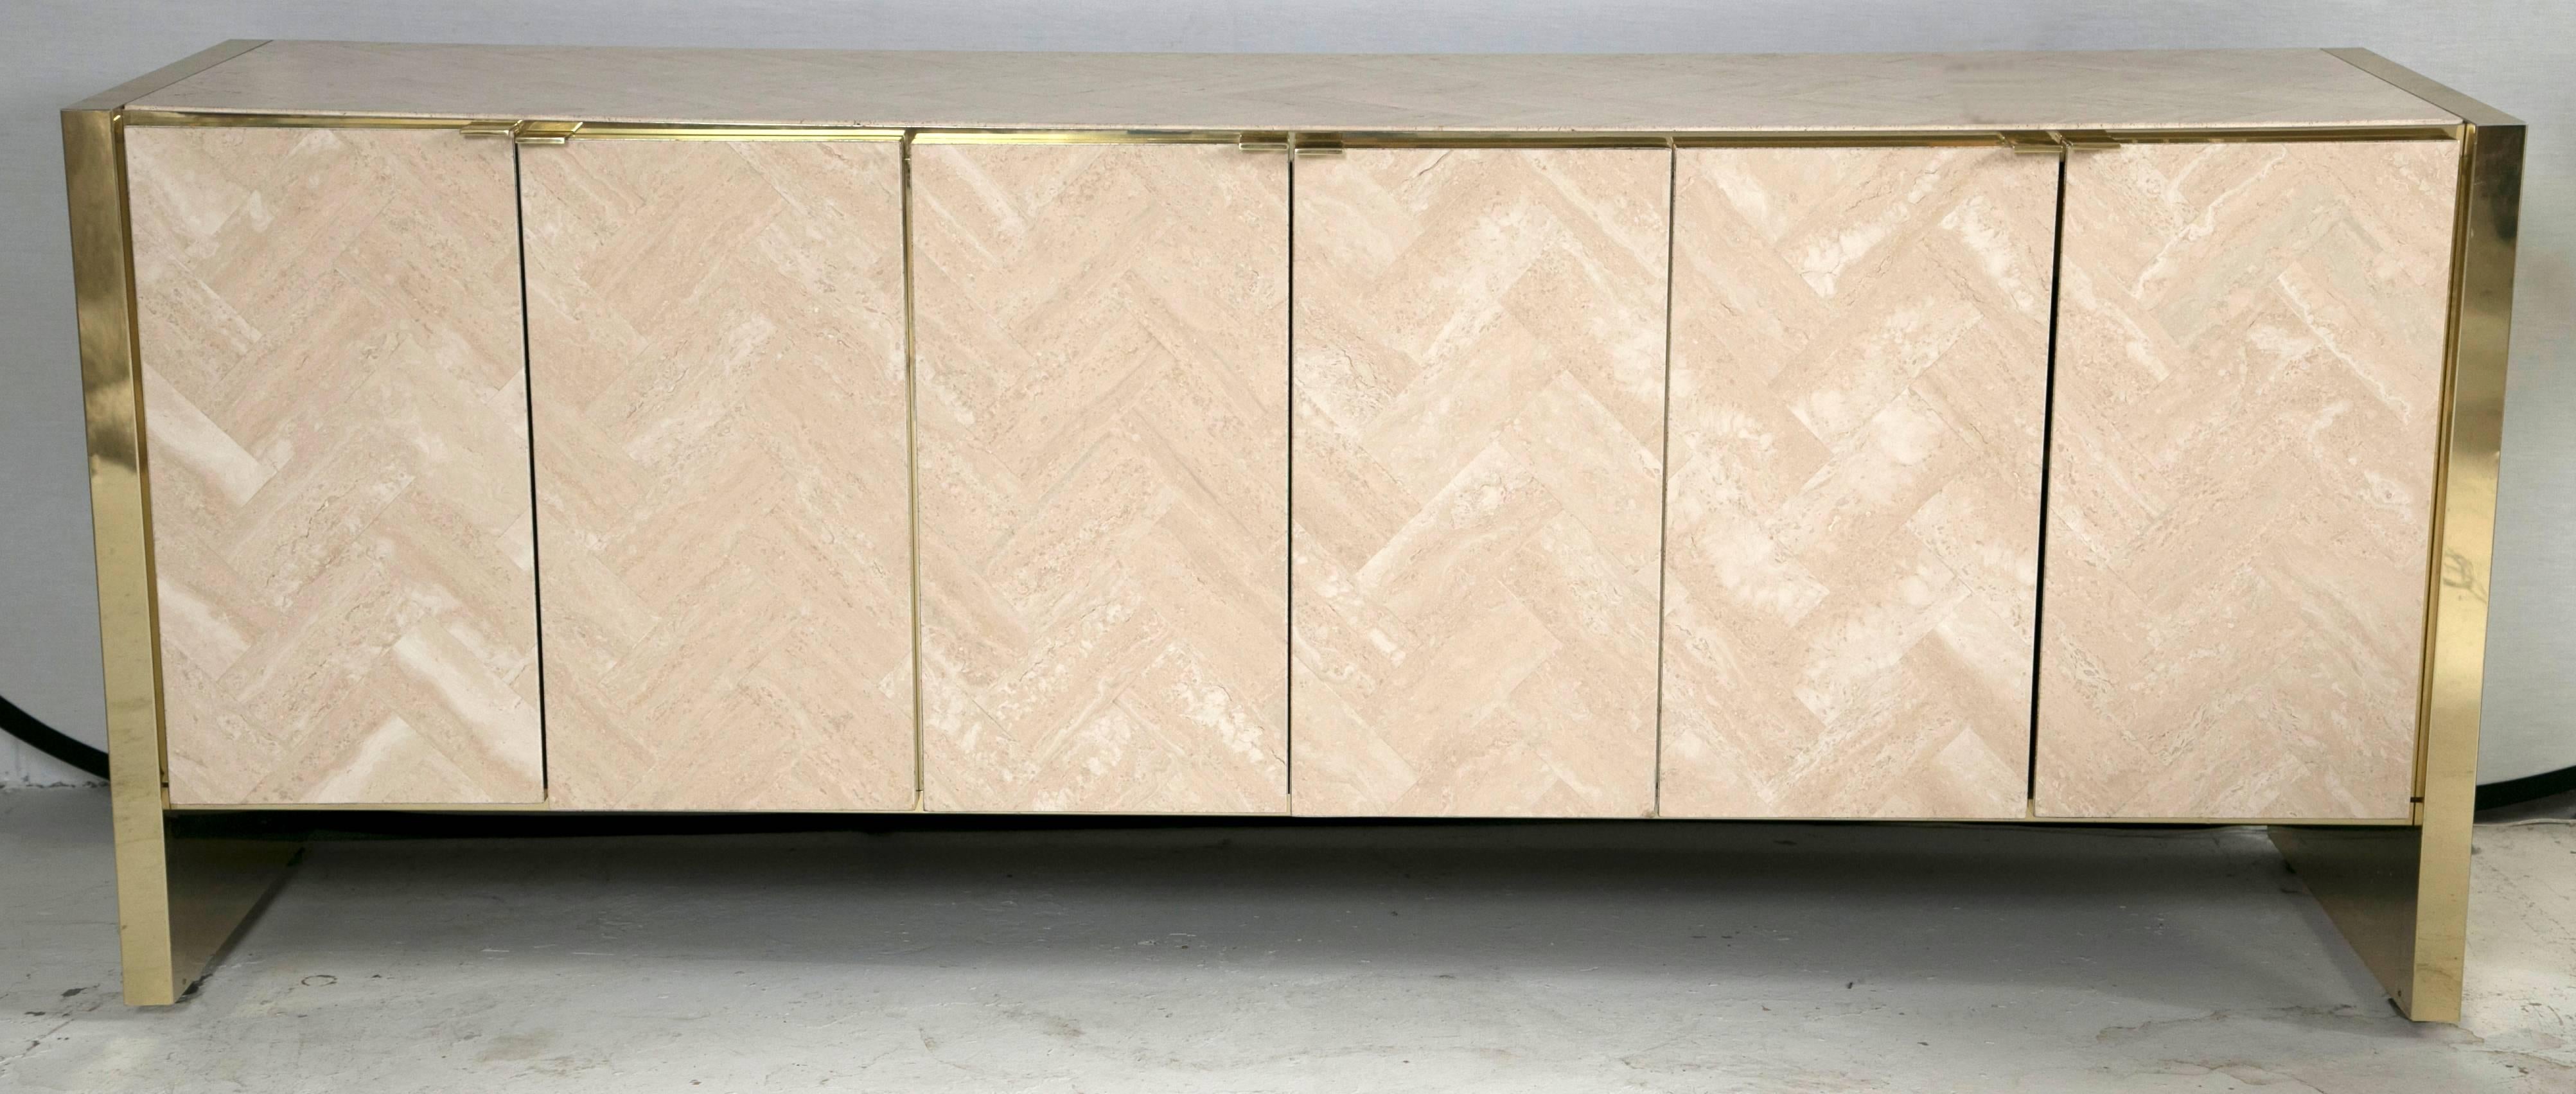 A piece that is as elegant as it is powerful. Designed by Ello Furniture, it has three cabinets, two of which have built in drawers. The faces of each door are designed with highly polished herringboned travertine. The piece is then trimmed with